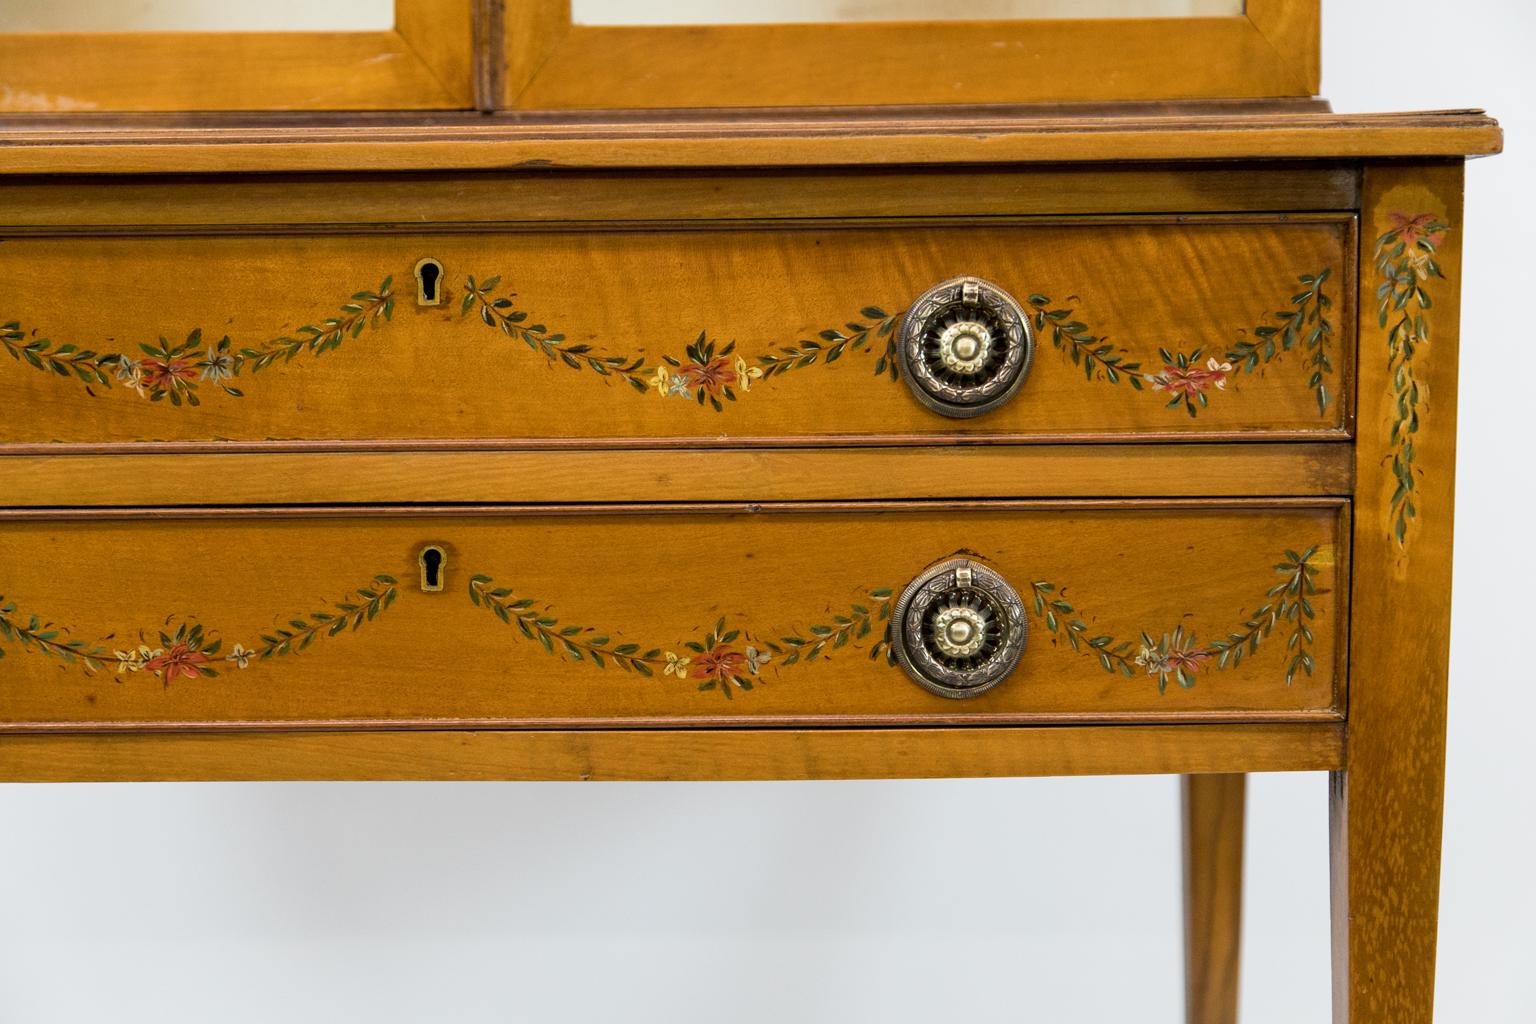 English painted satinwood display case is painted with floral leaf and ribbon motifs.
 